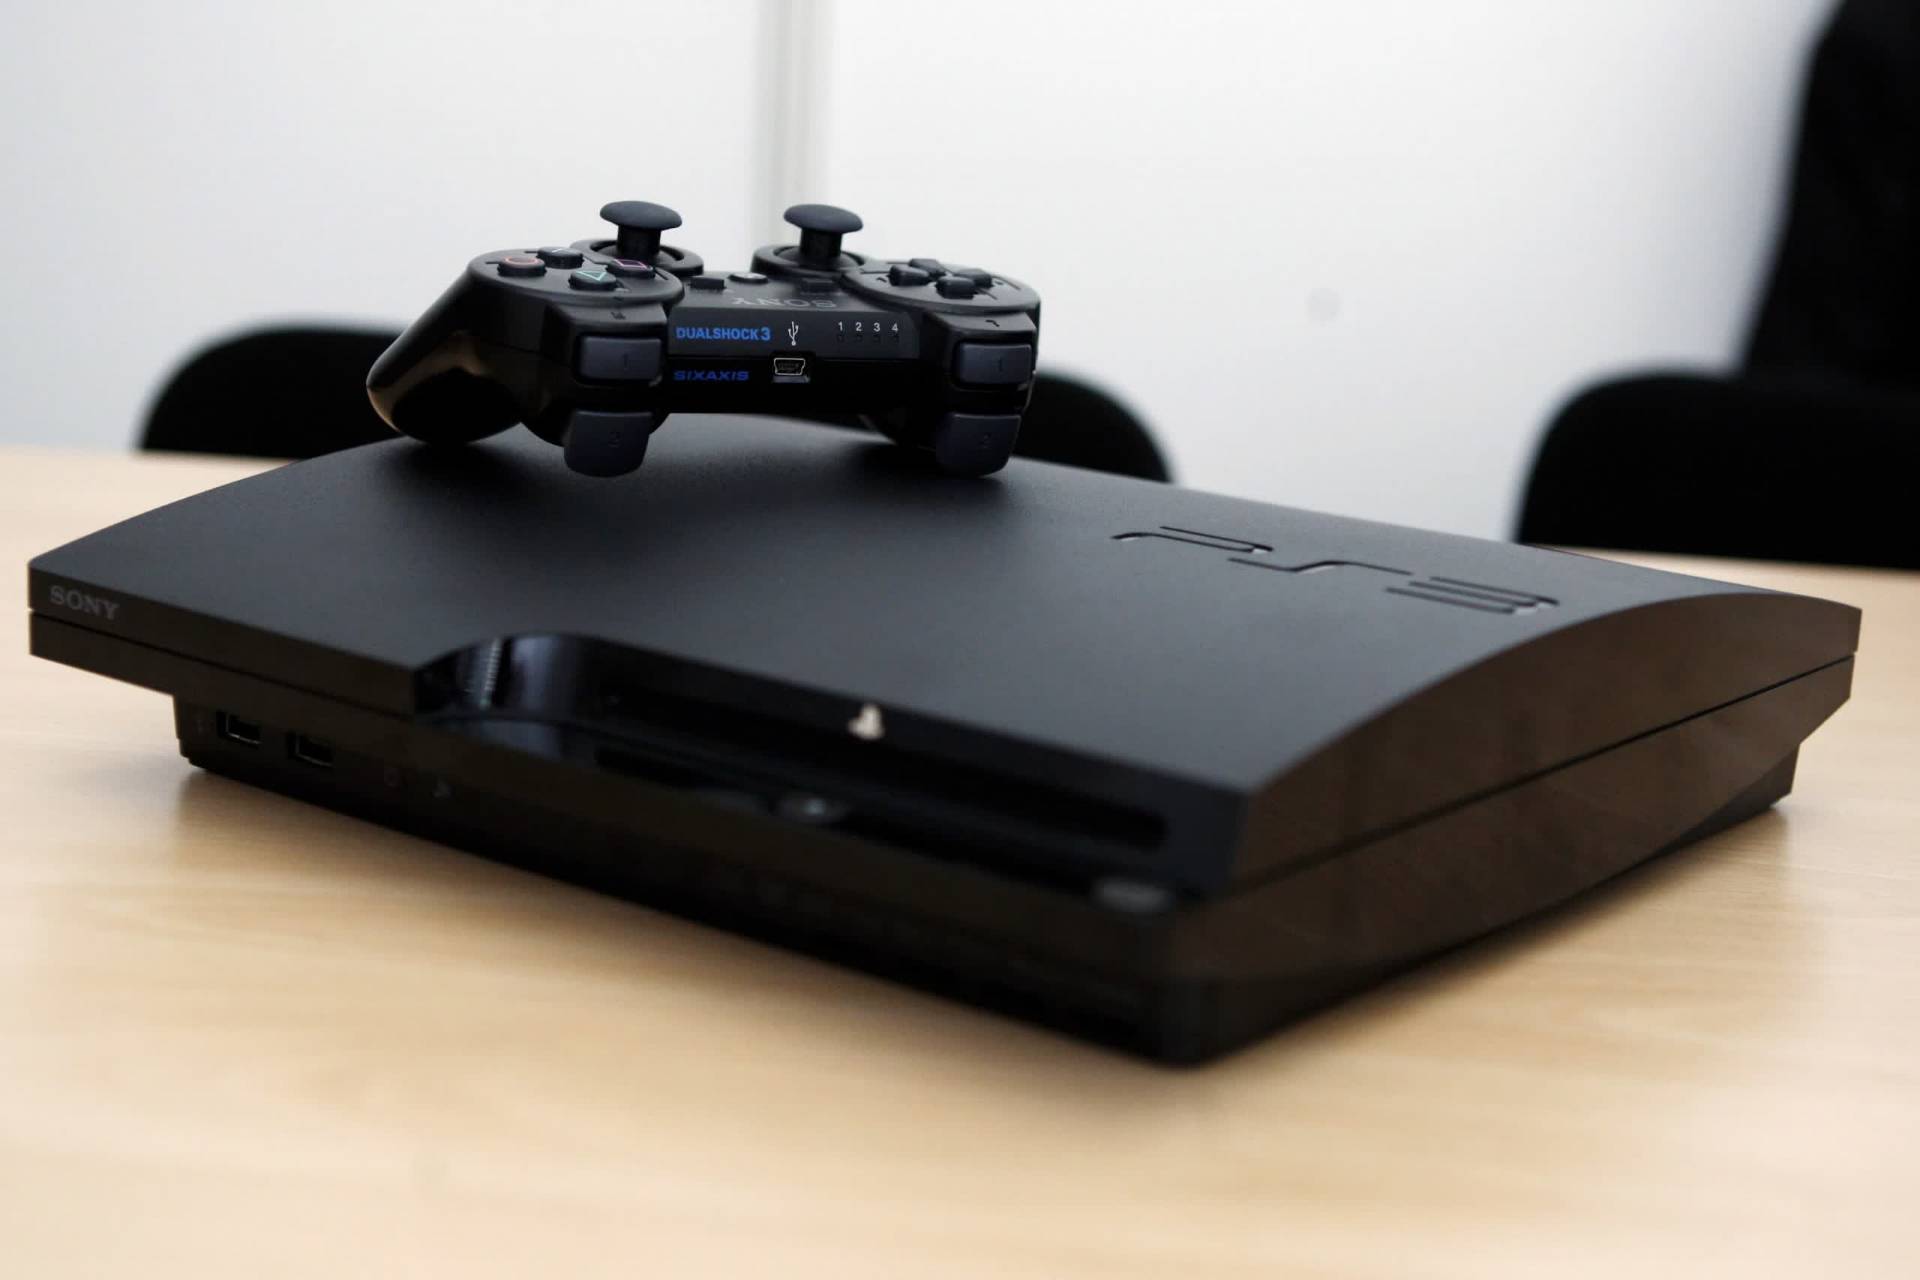 The Best Selling Video Game Consoles in the World